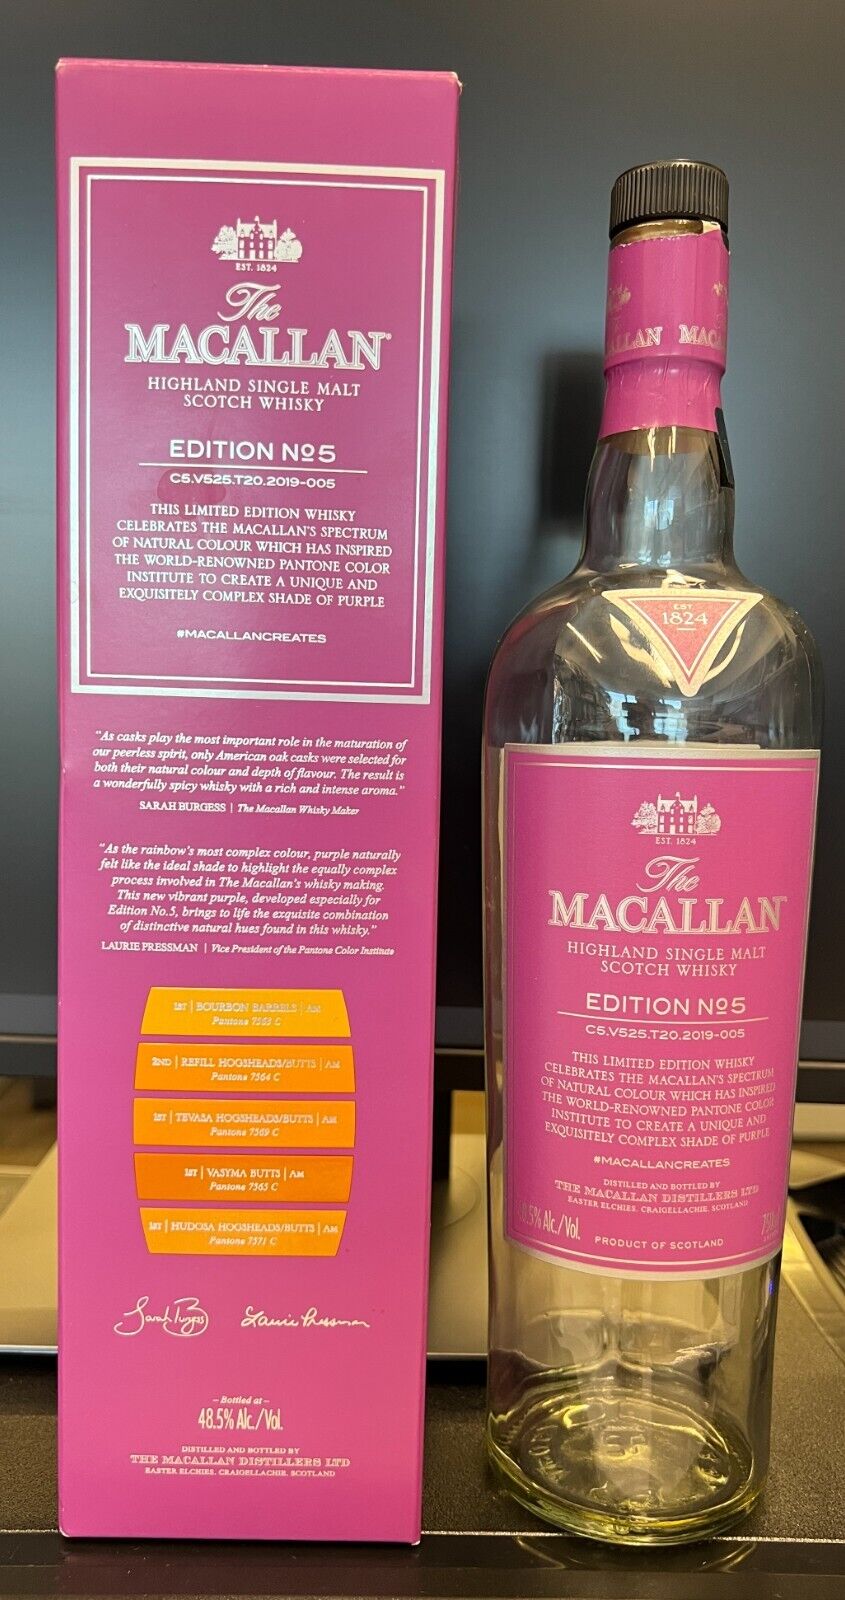 Macallan Edition 5 Box and Bottle